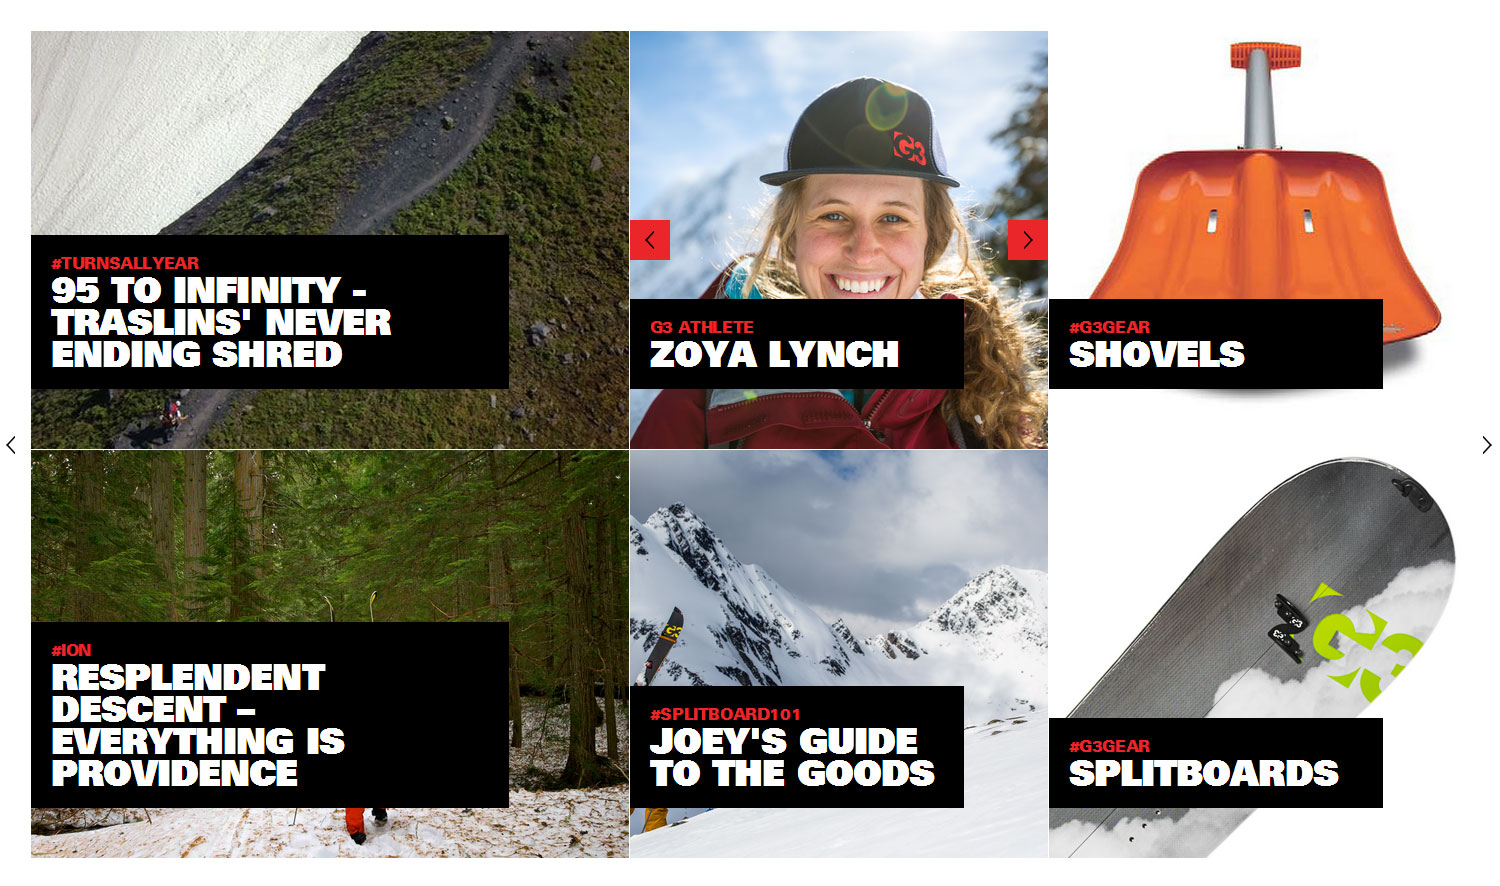 G3 Genuine Guide Gear - Website of the Day